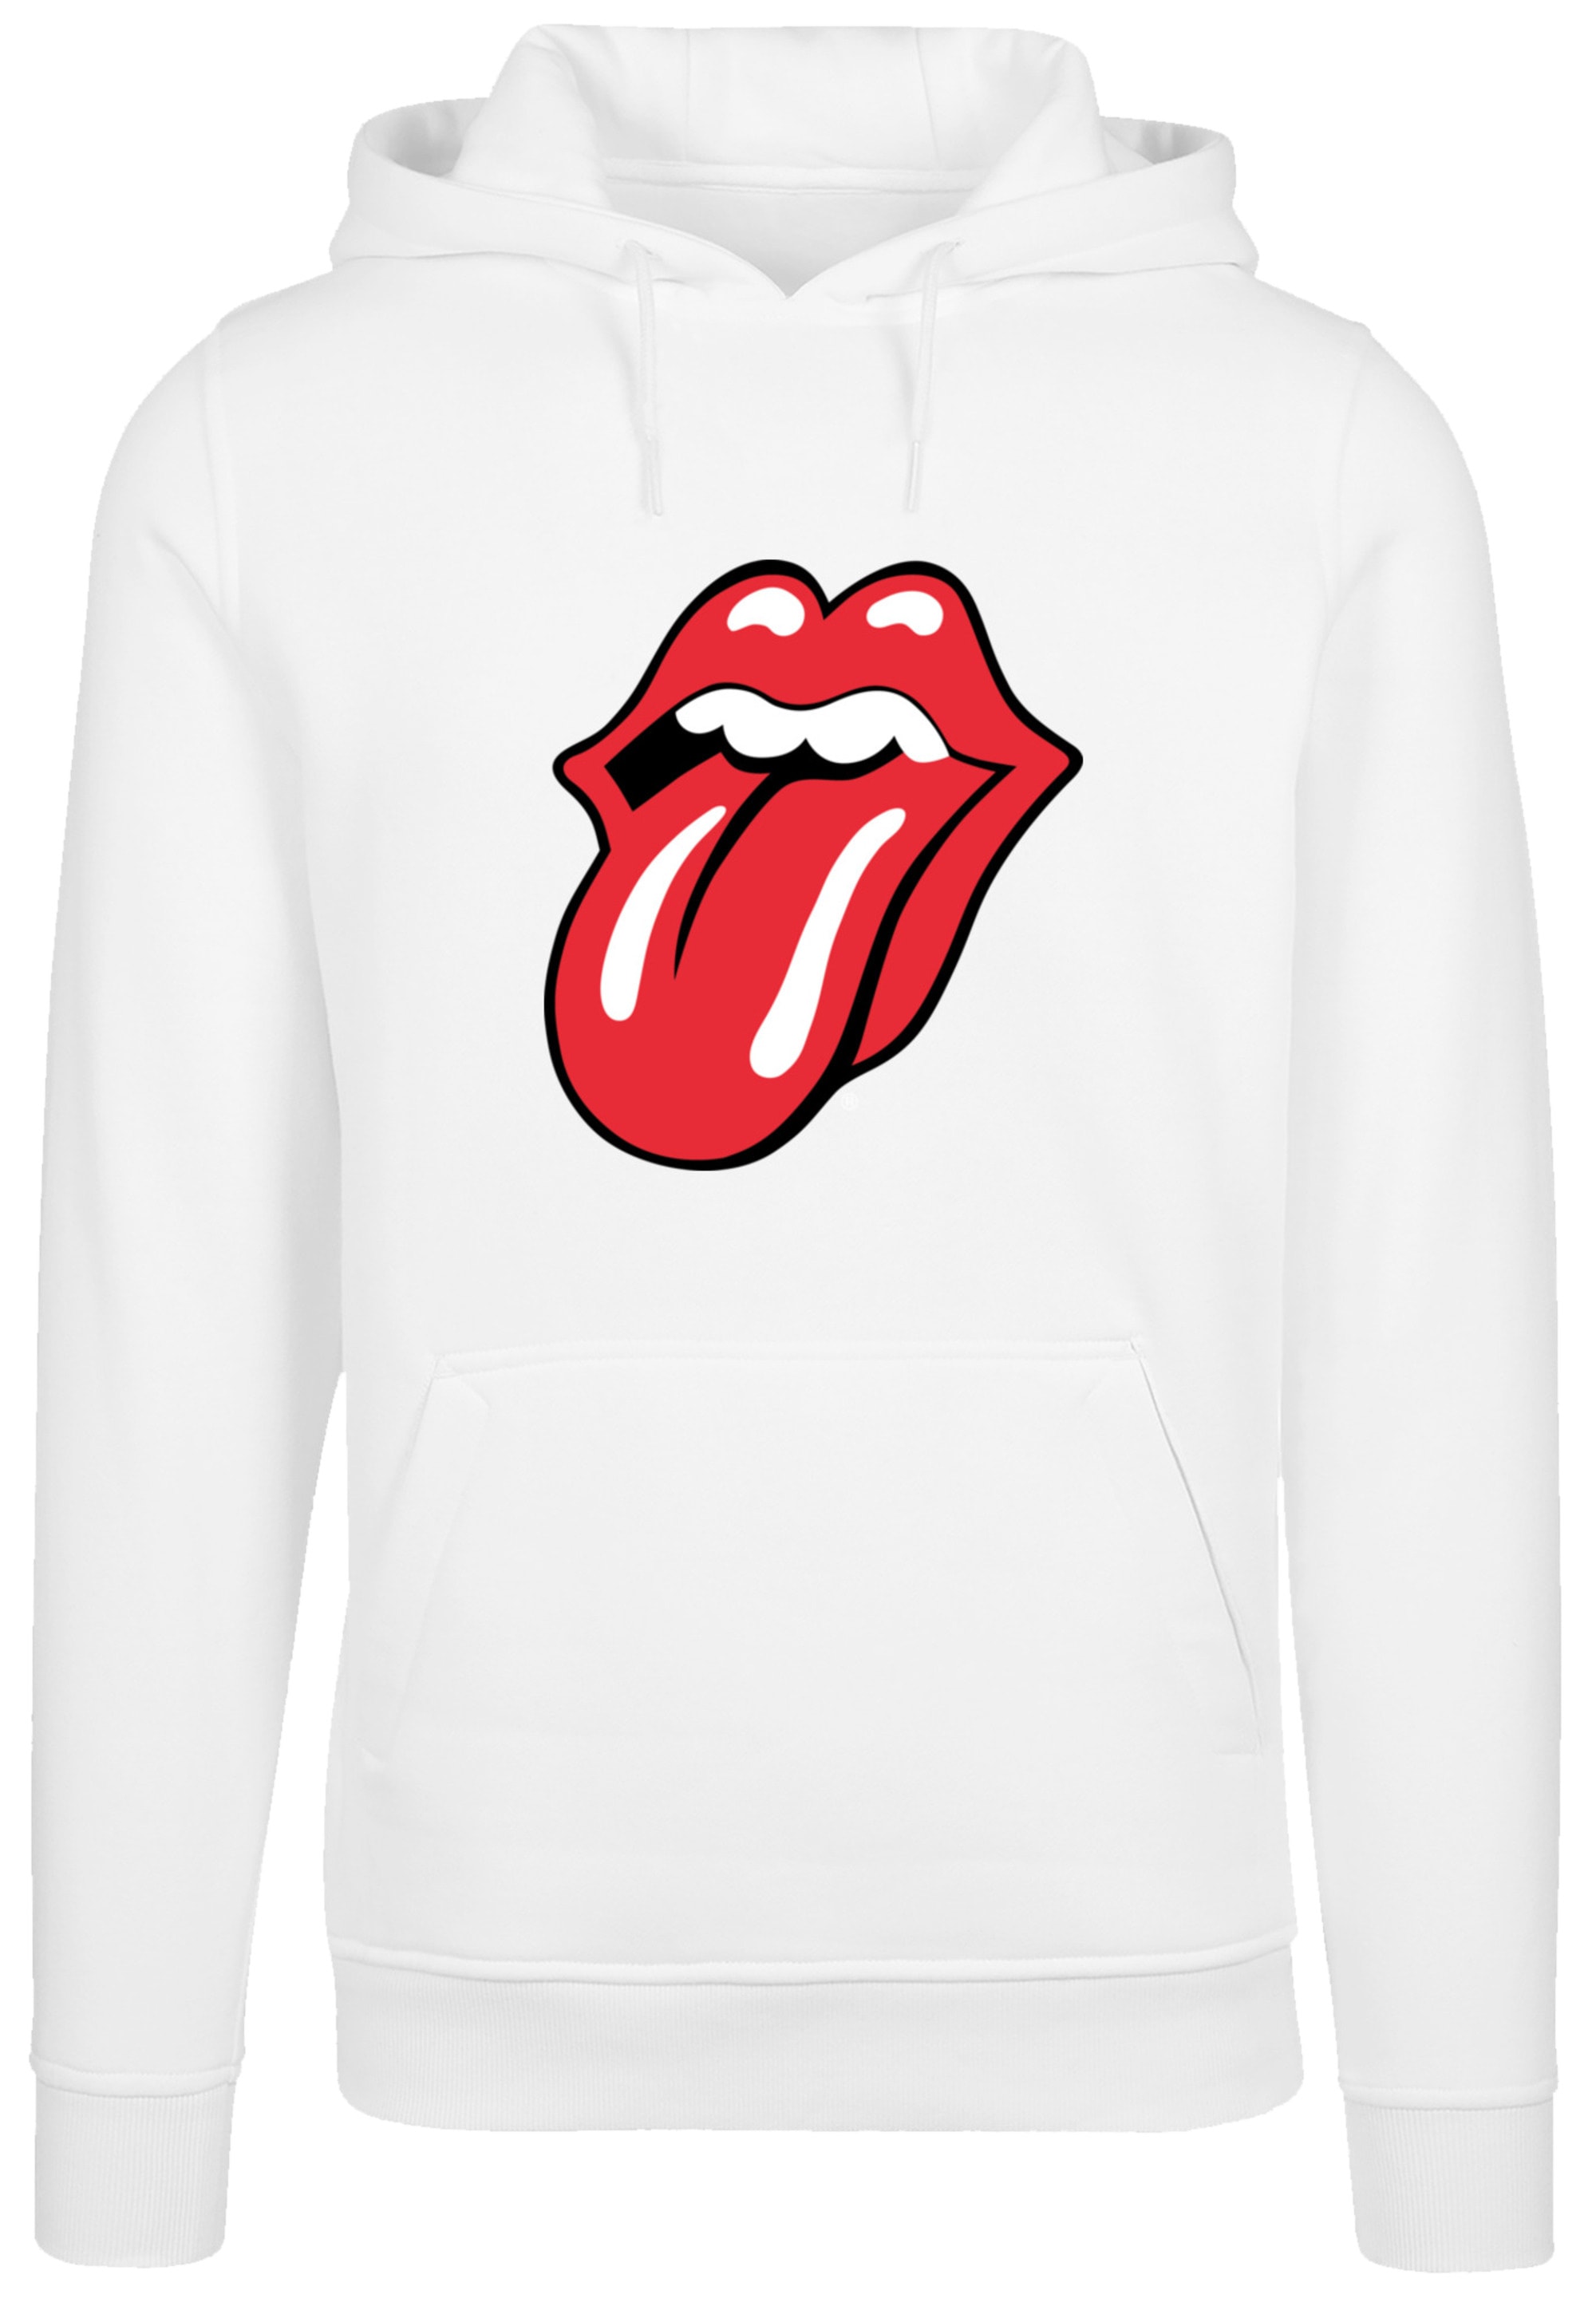 Stones Classic Zunge Warm, Band«, I\'m | kaufen online F4NT4STIC Bequem Rolling walking Kapuzenpullover Rock Hoodie, Musik »The